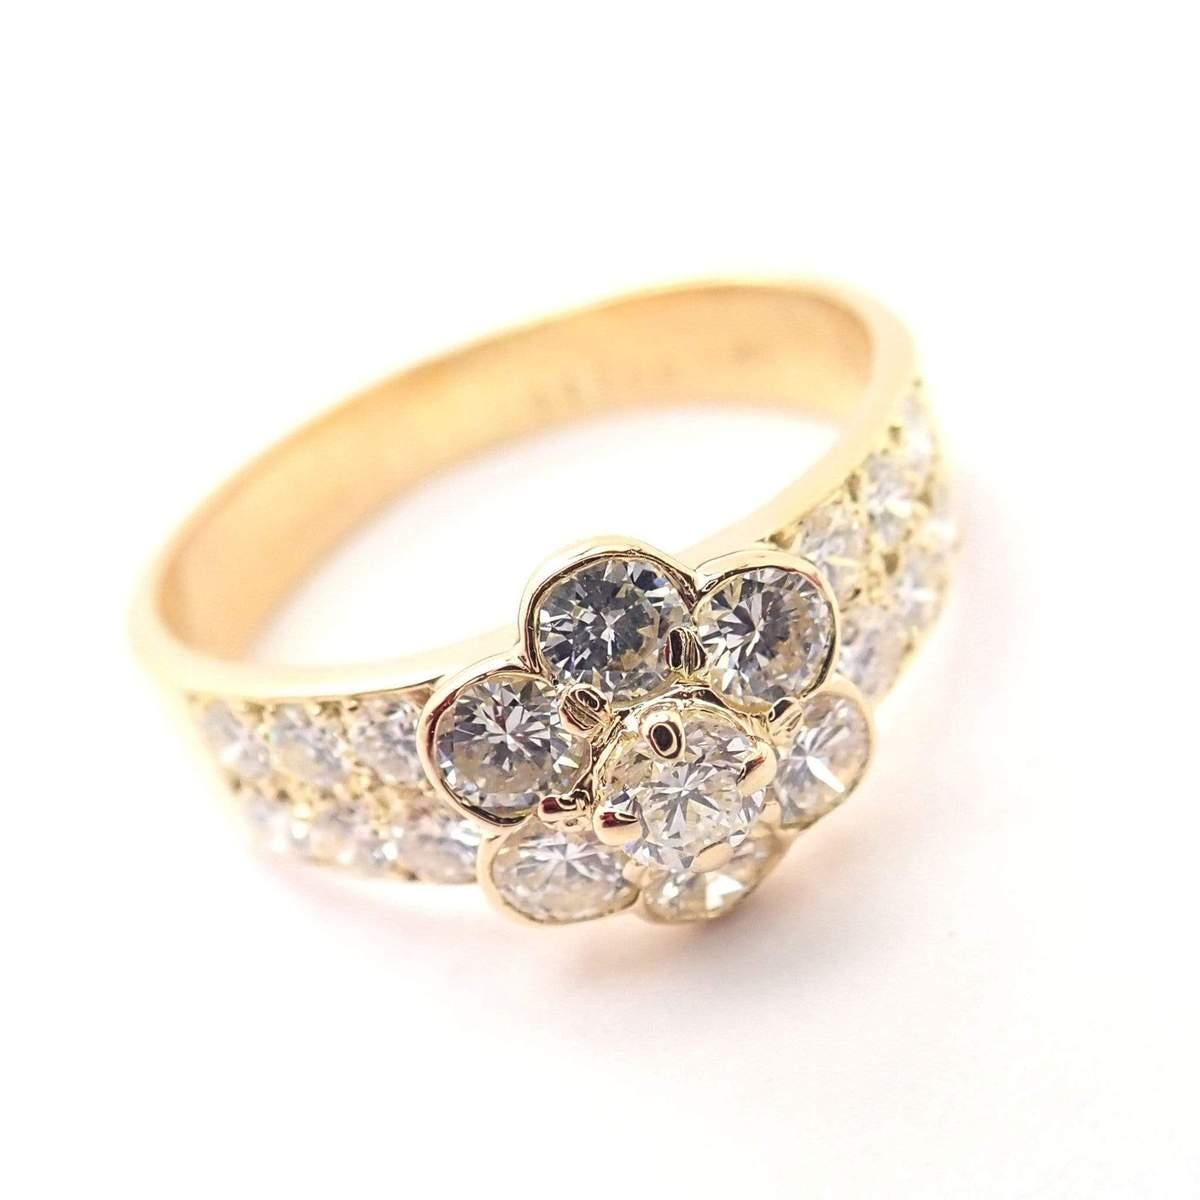 Van Cleef & Arpels Diamond Fleurette Yellow Gold Ring In Excellent Condition For Sale In Holland, PA